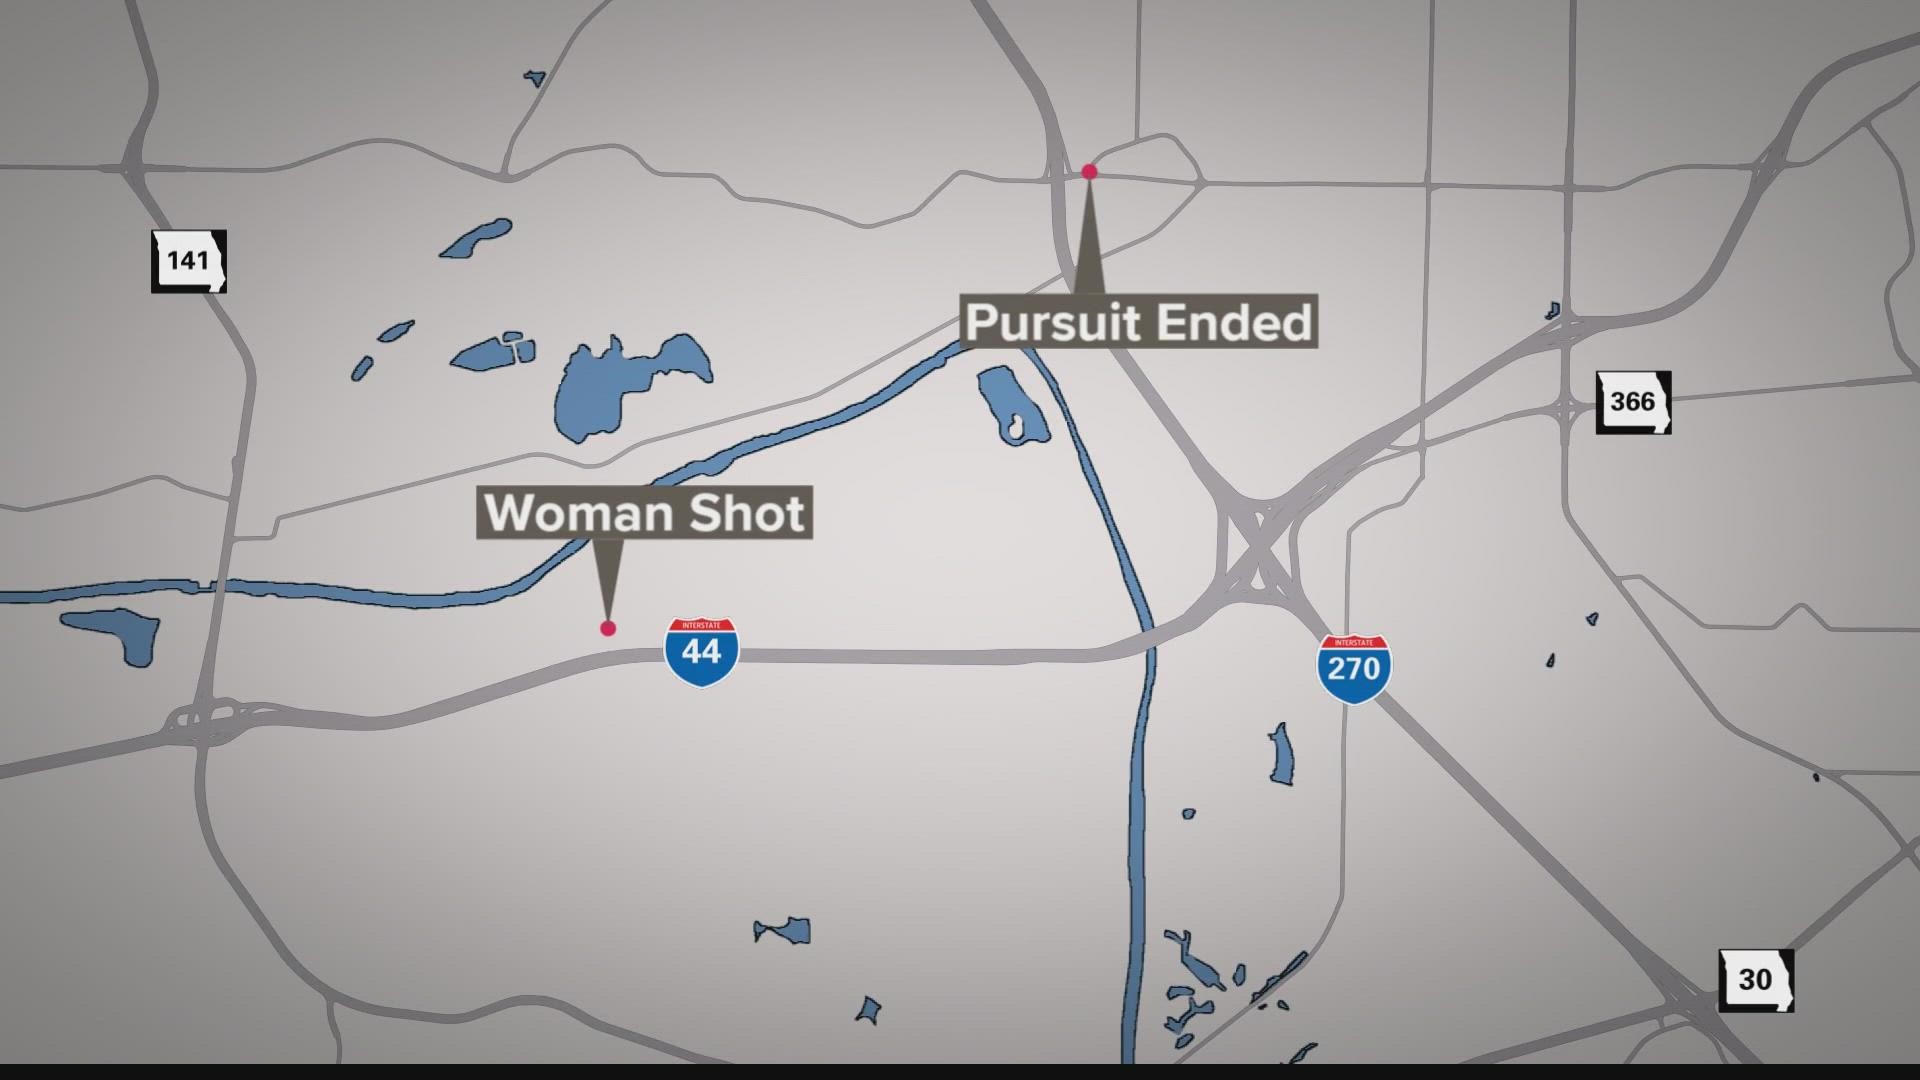 Police said the woman was found shot to death after the man shot at officers and led them on a 10-minute chase away from the scene of the shooting.